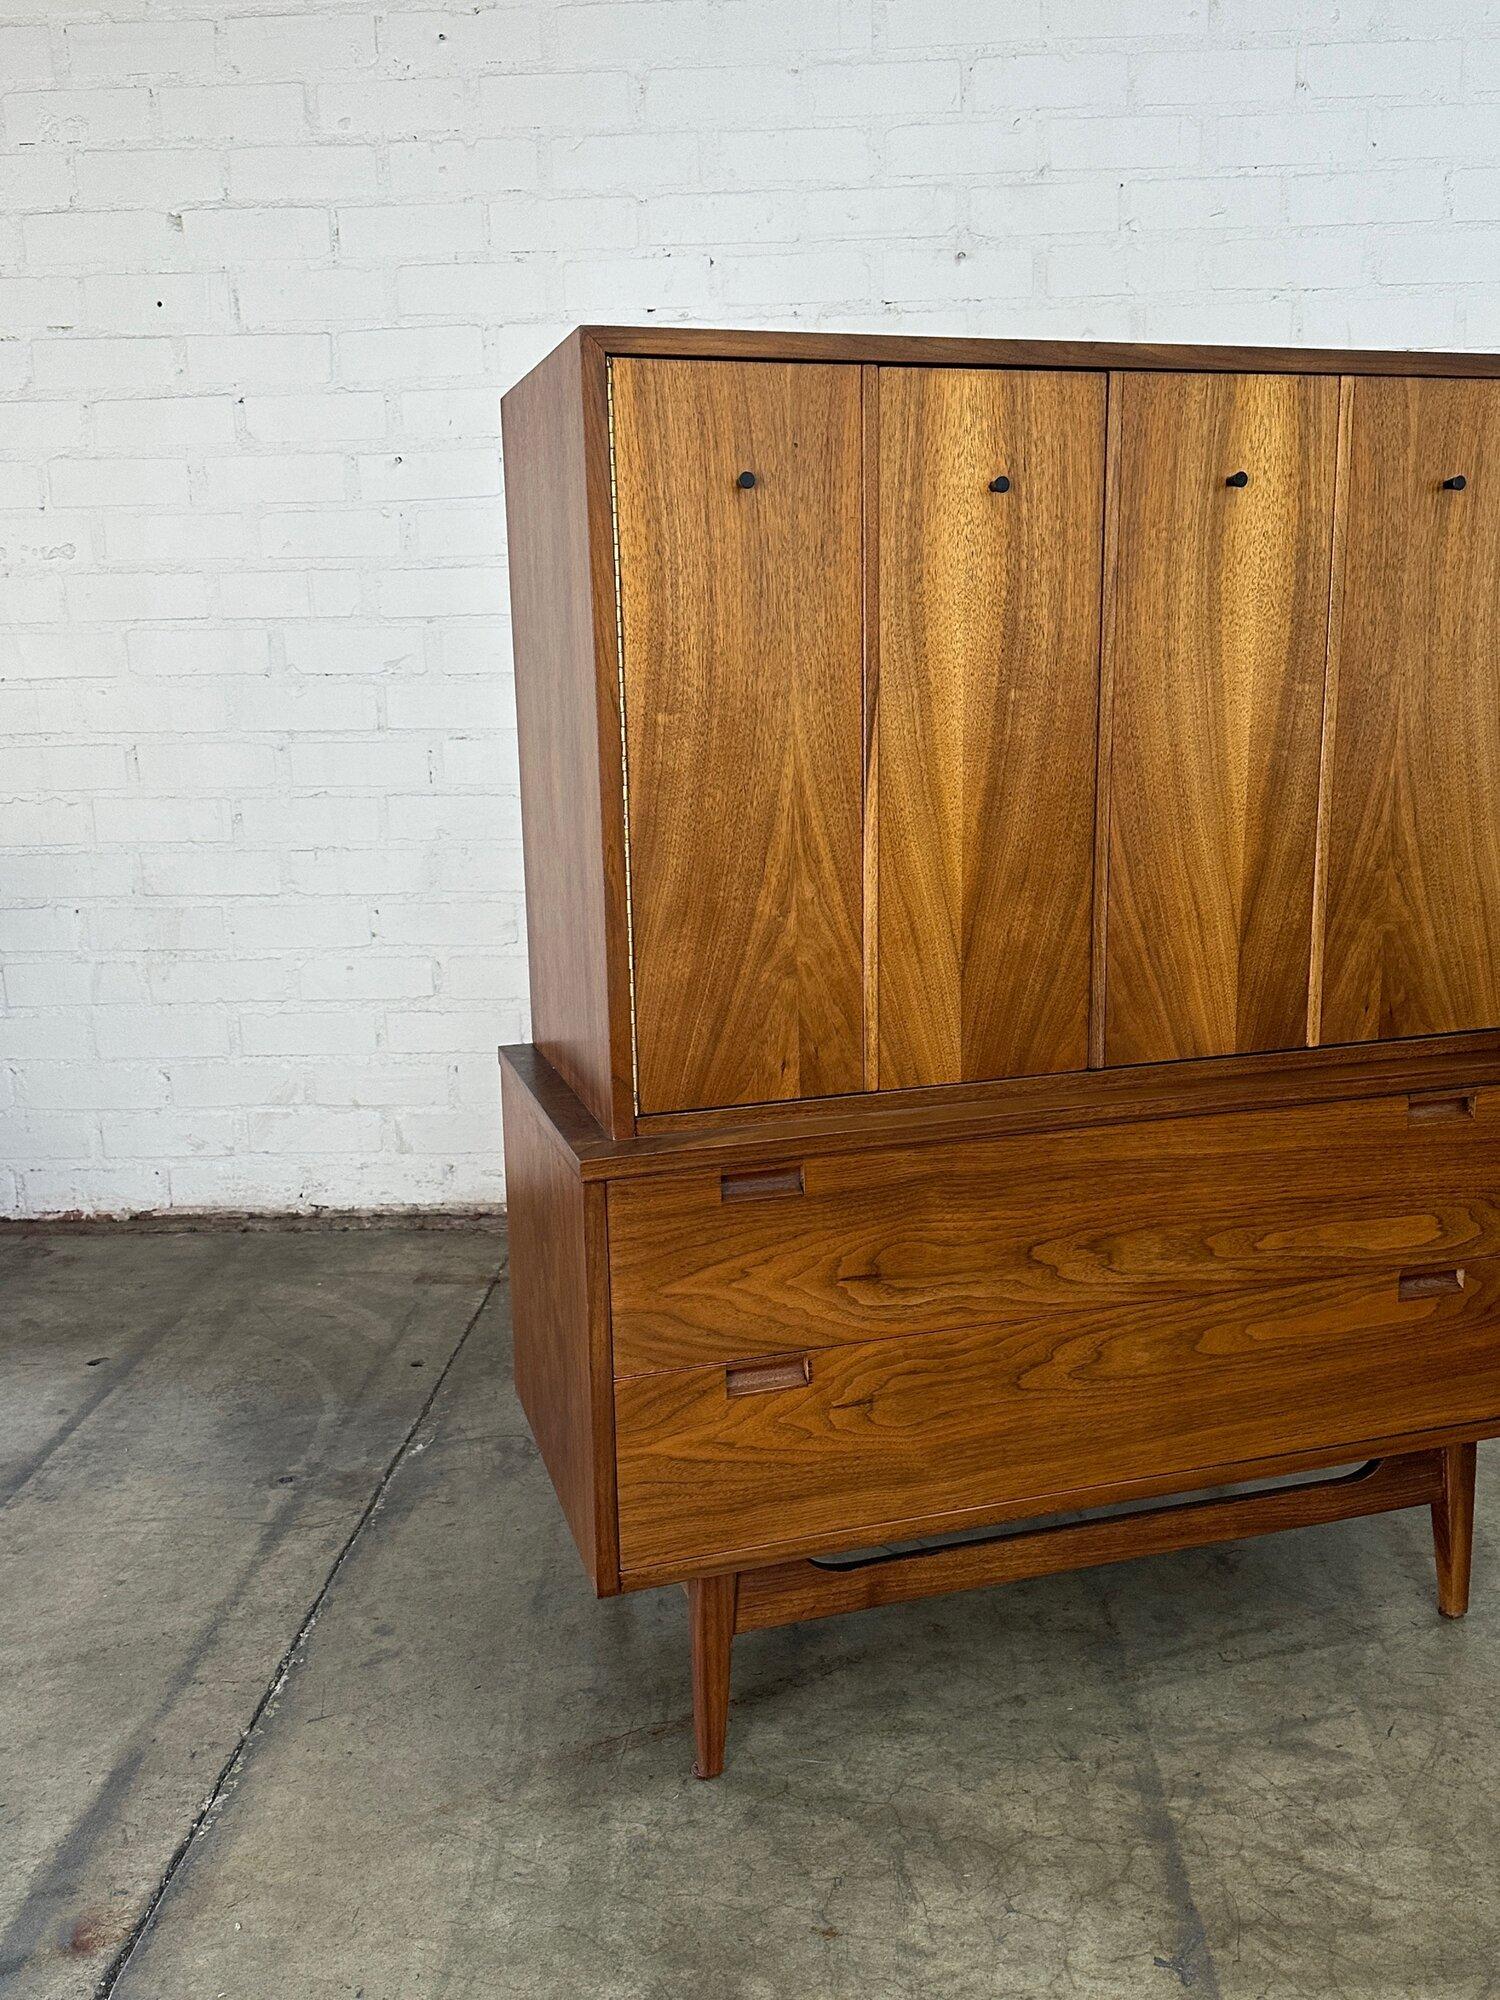 W42.5 D19.5 D17 H53

Fully restored dresser in great condition. Item features recessed sculpted handles and a nicely supported base with with cross bars. Dresser is fully functional and sturdy.

